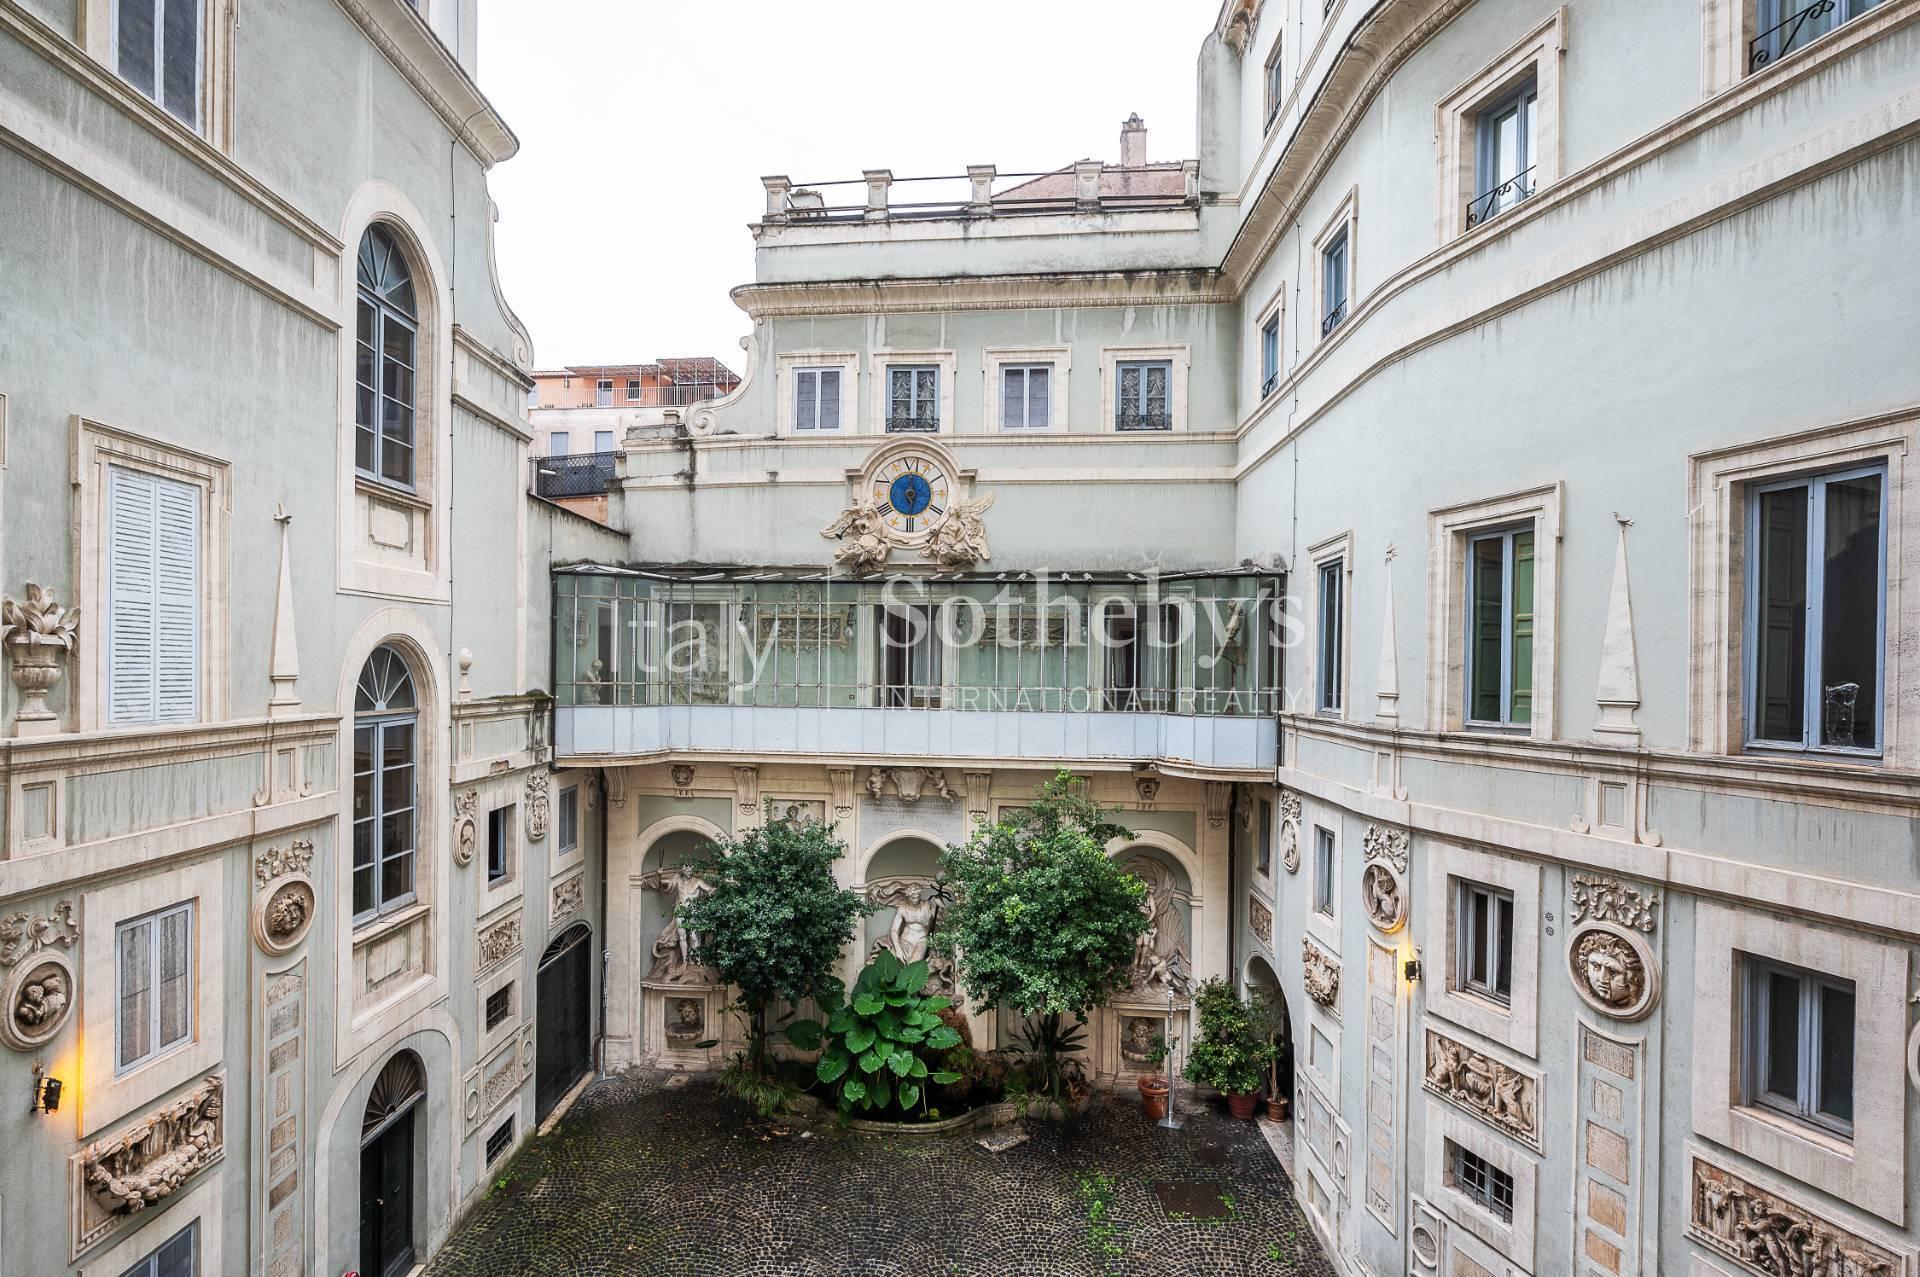 Palazzo Rondinini, historical building in the heart of Rome - 3